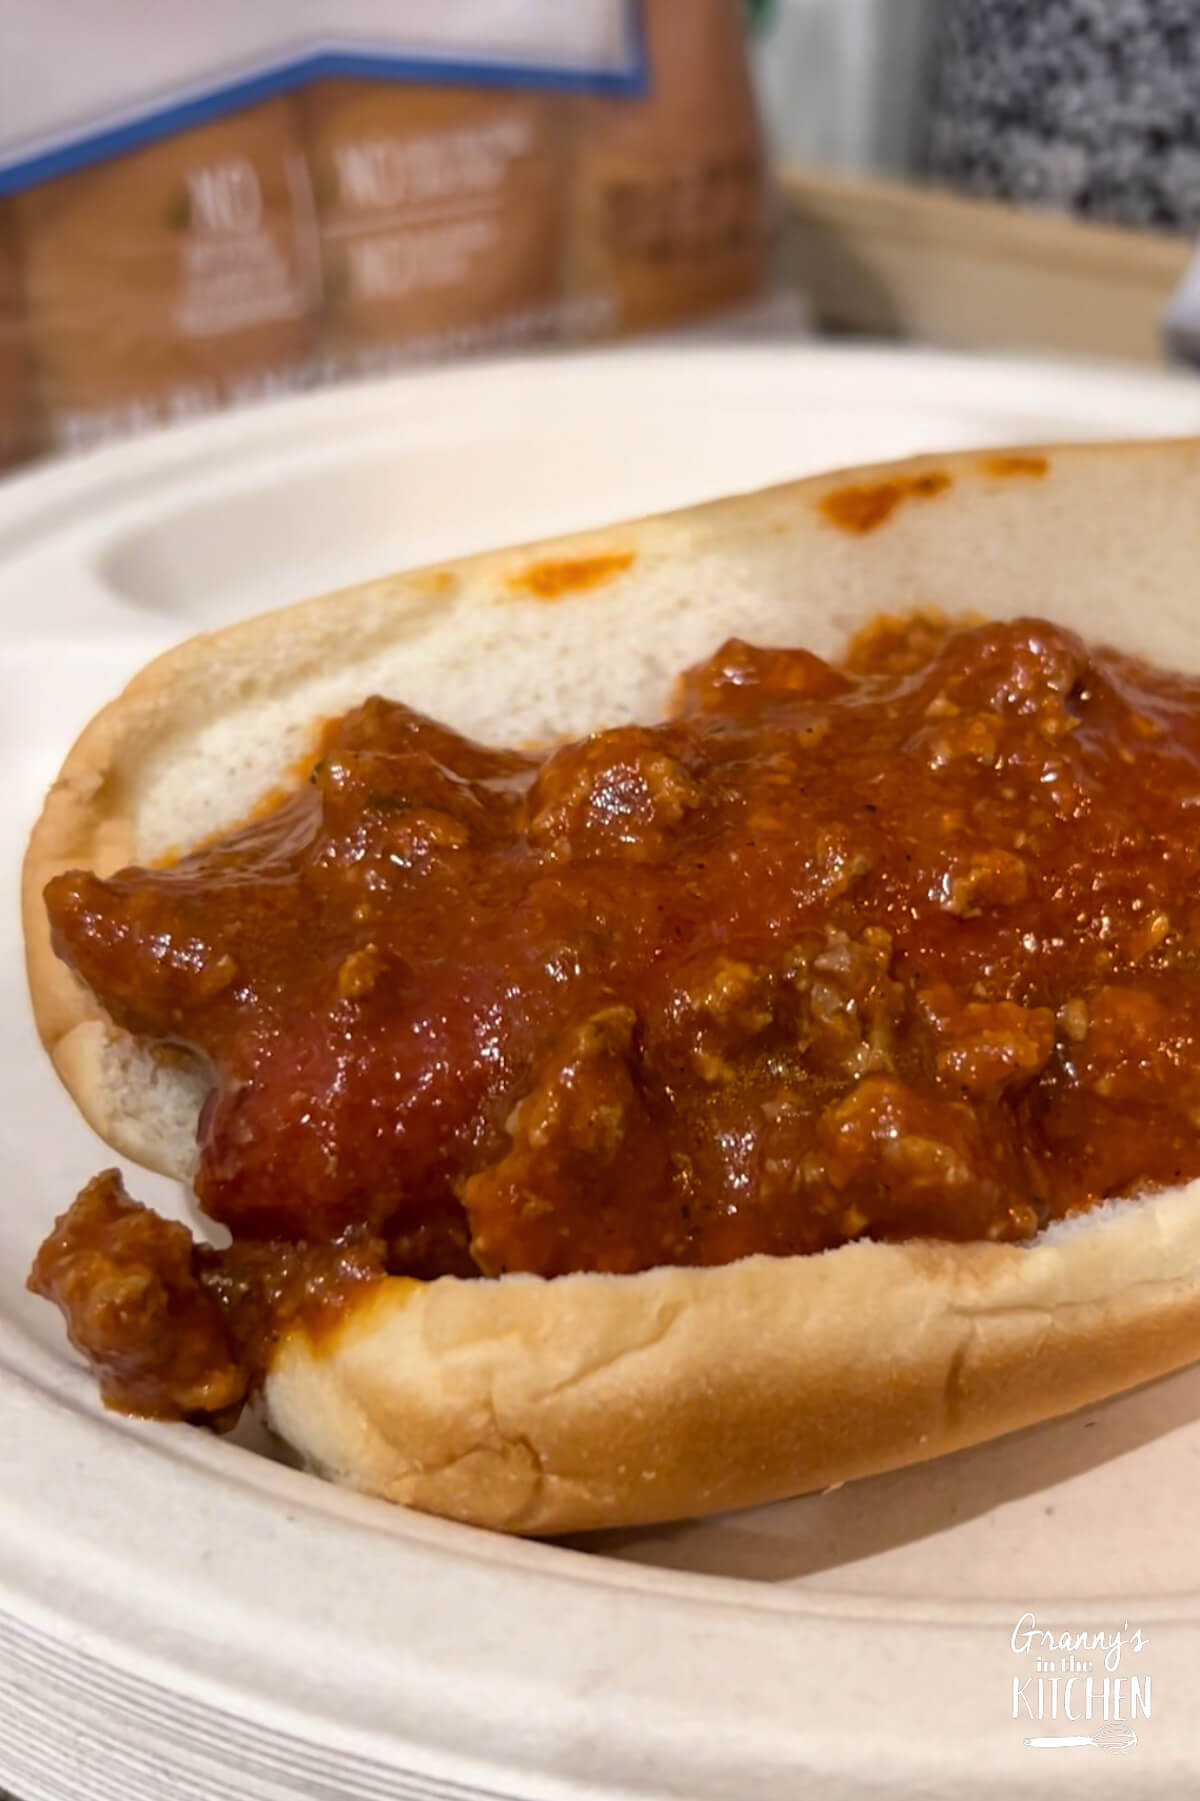 hot dog topped with West Virginia hot dog sauce.